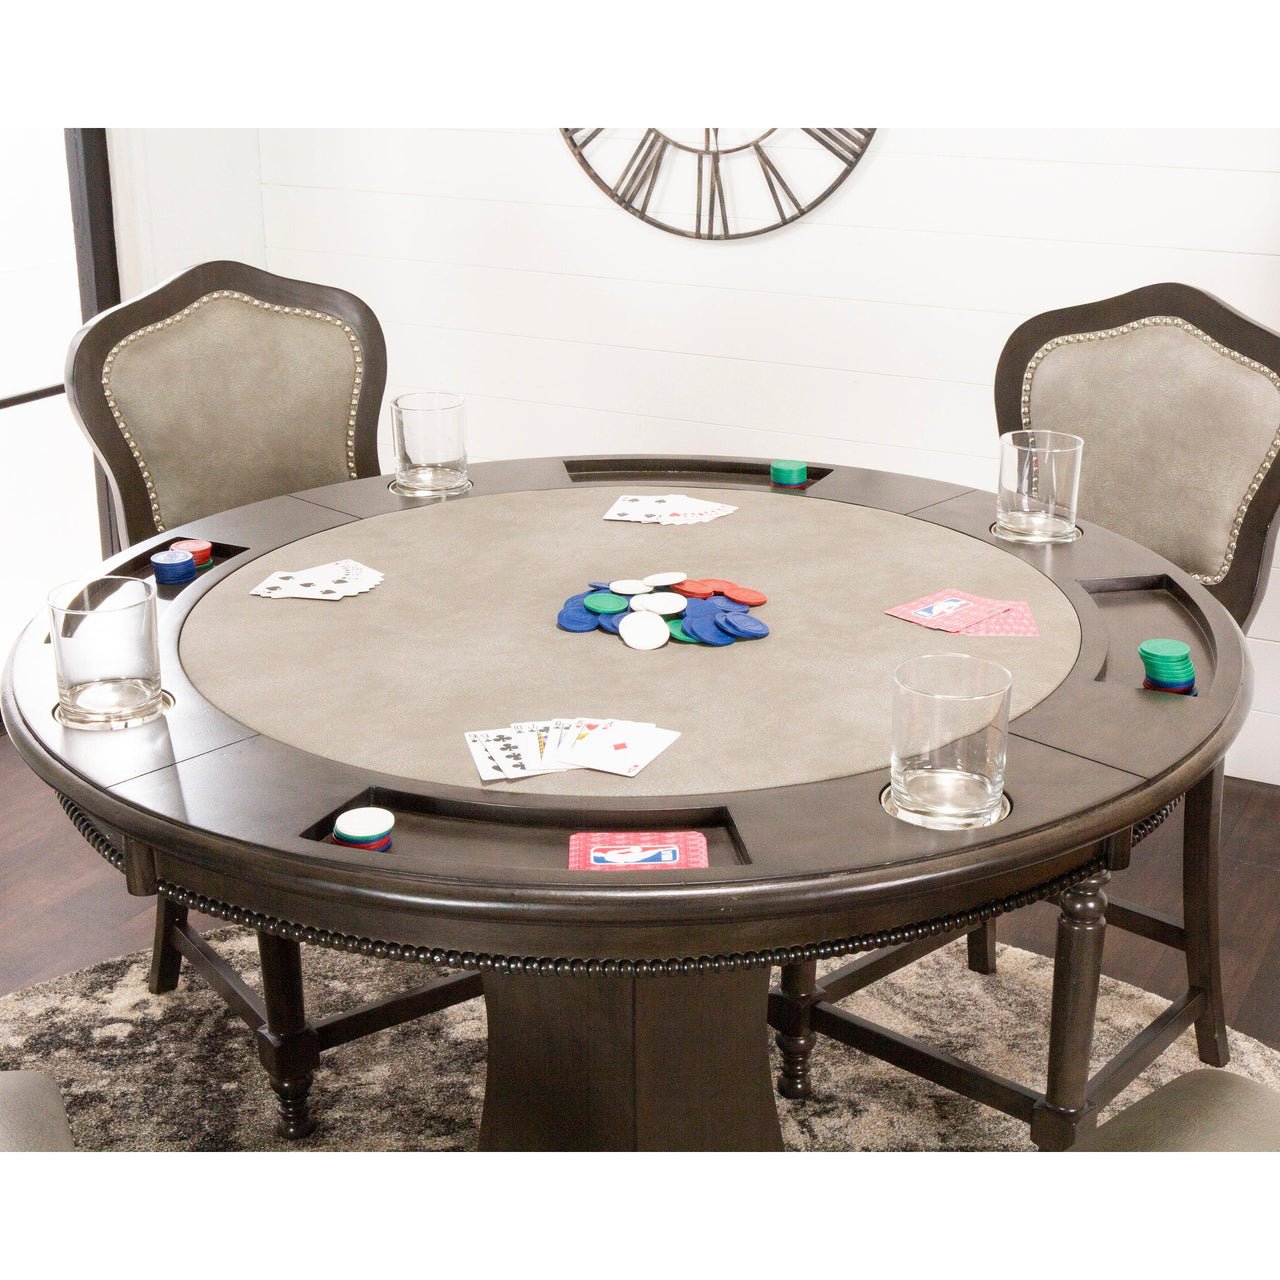 Convertible Round Counter Height Dining, Chess and Poker Table Set Vegas With 4 matching chairs-AMERICANA-POKER-TABLES